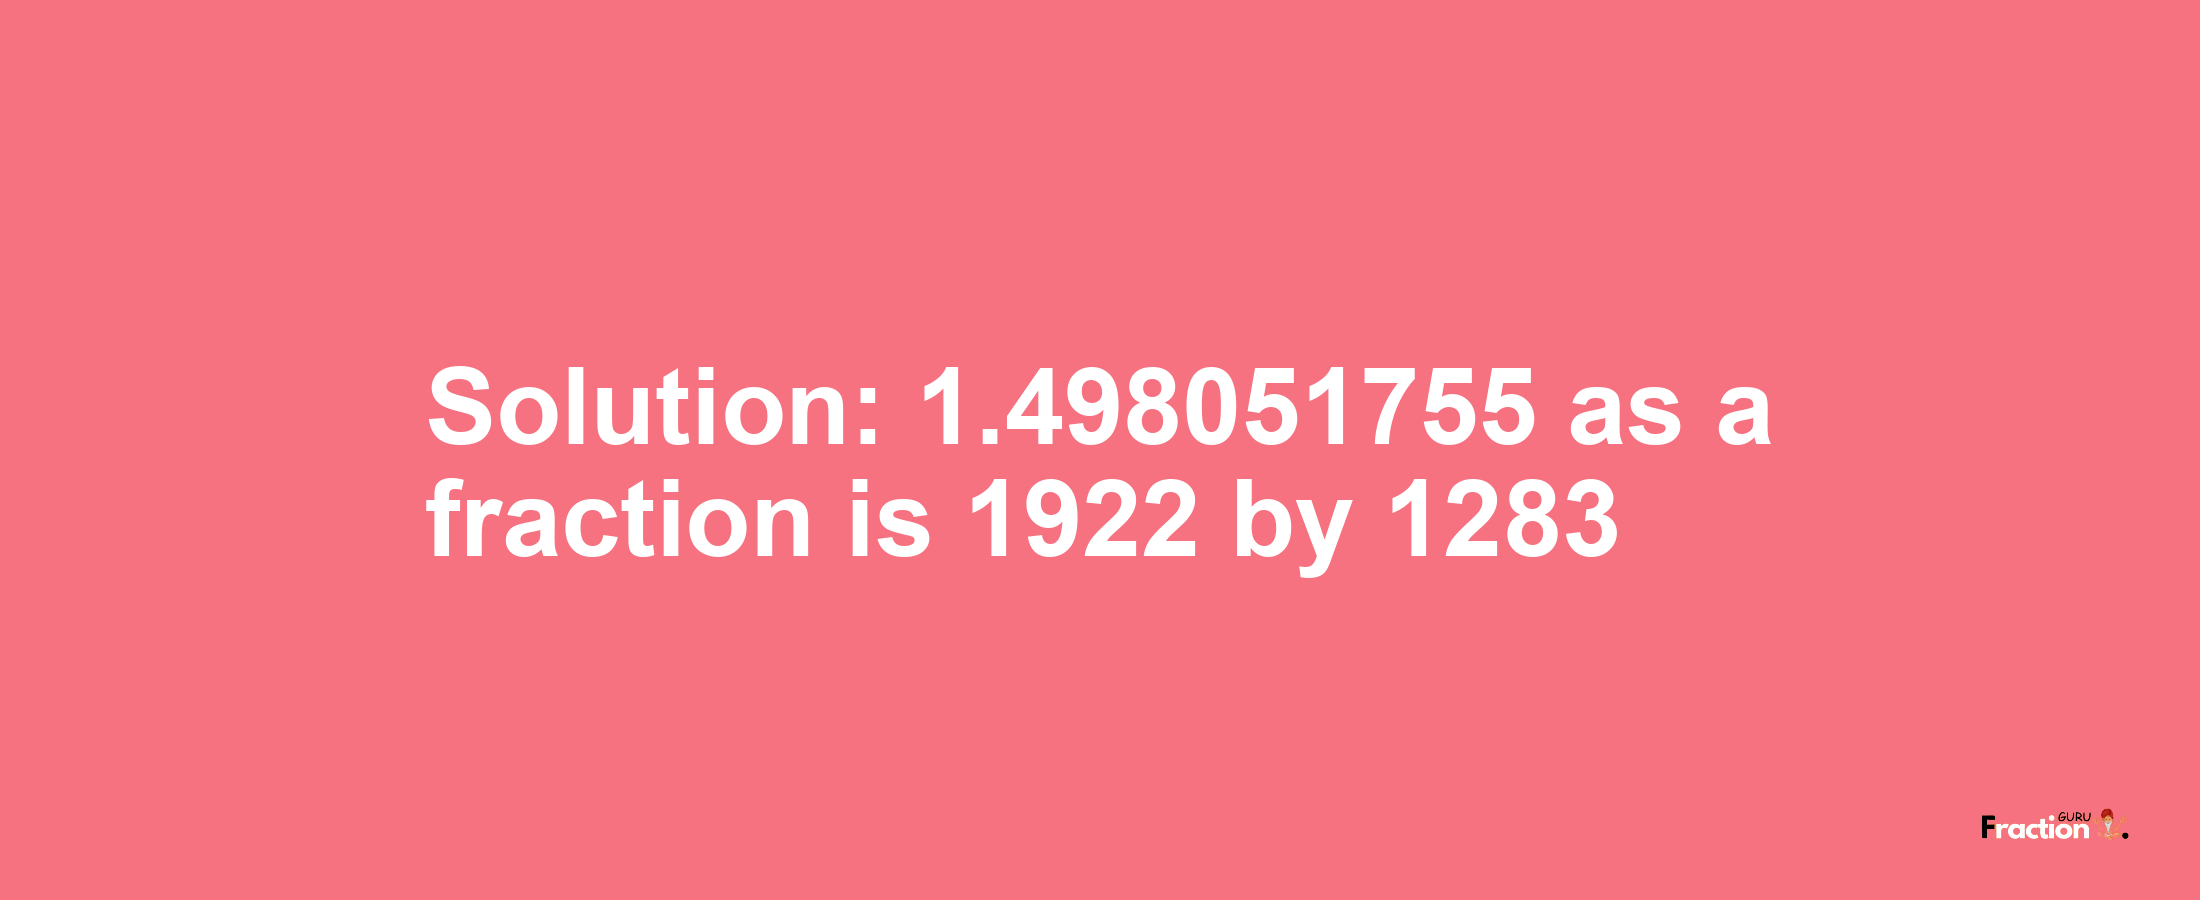 Solution:1.498051755 as a fraction is 1922/1283